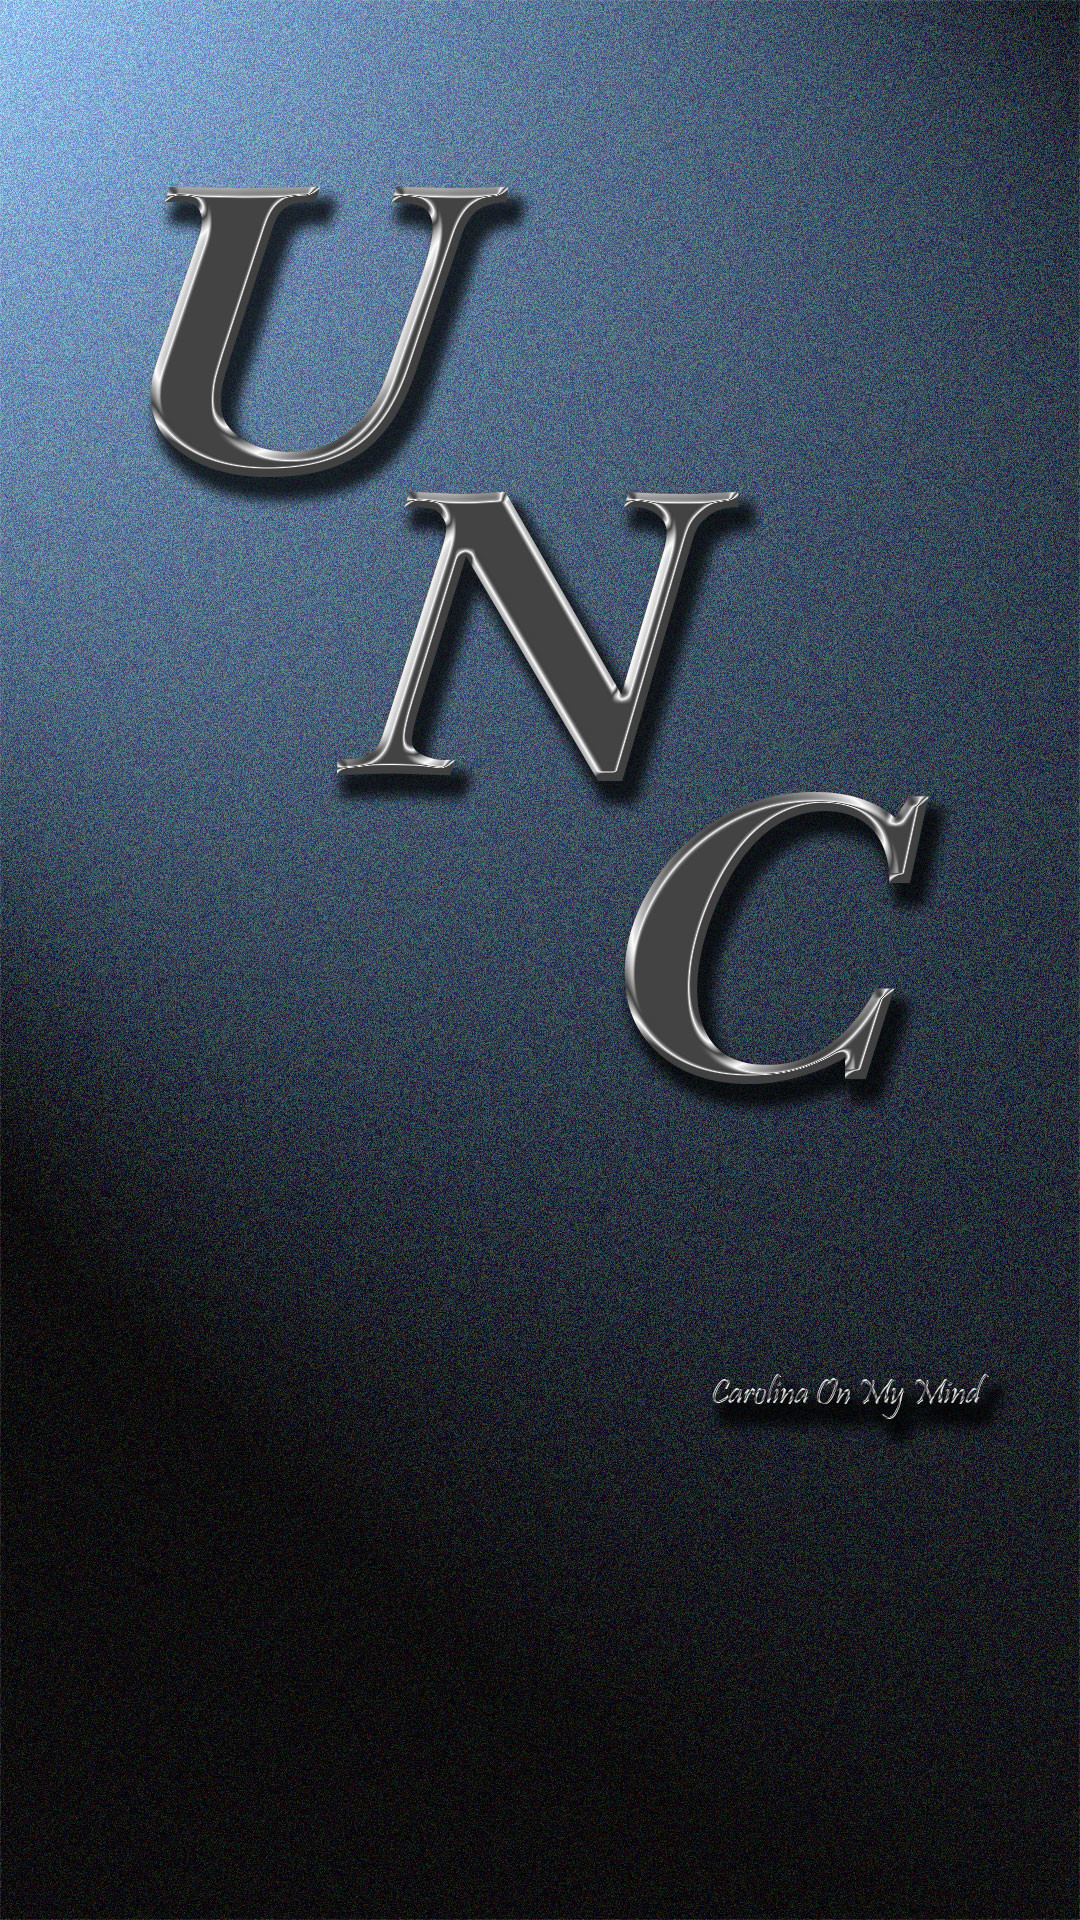 1080x1920 UNC Wallpaper Metal Letters Staggered on Lit Wall 1080 x 1920